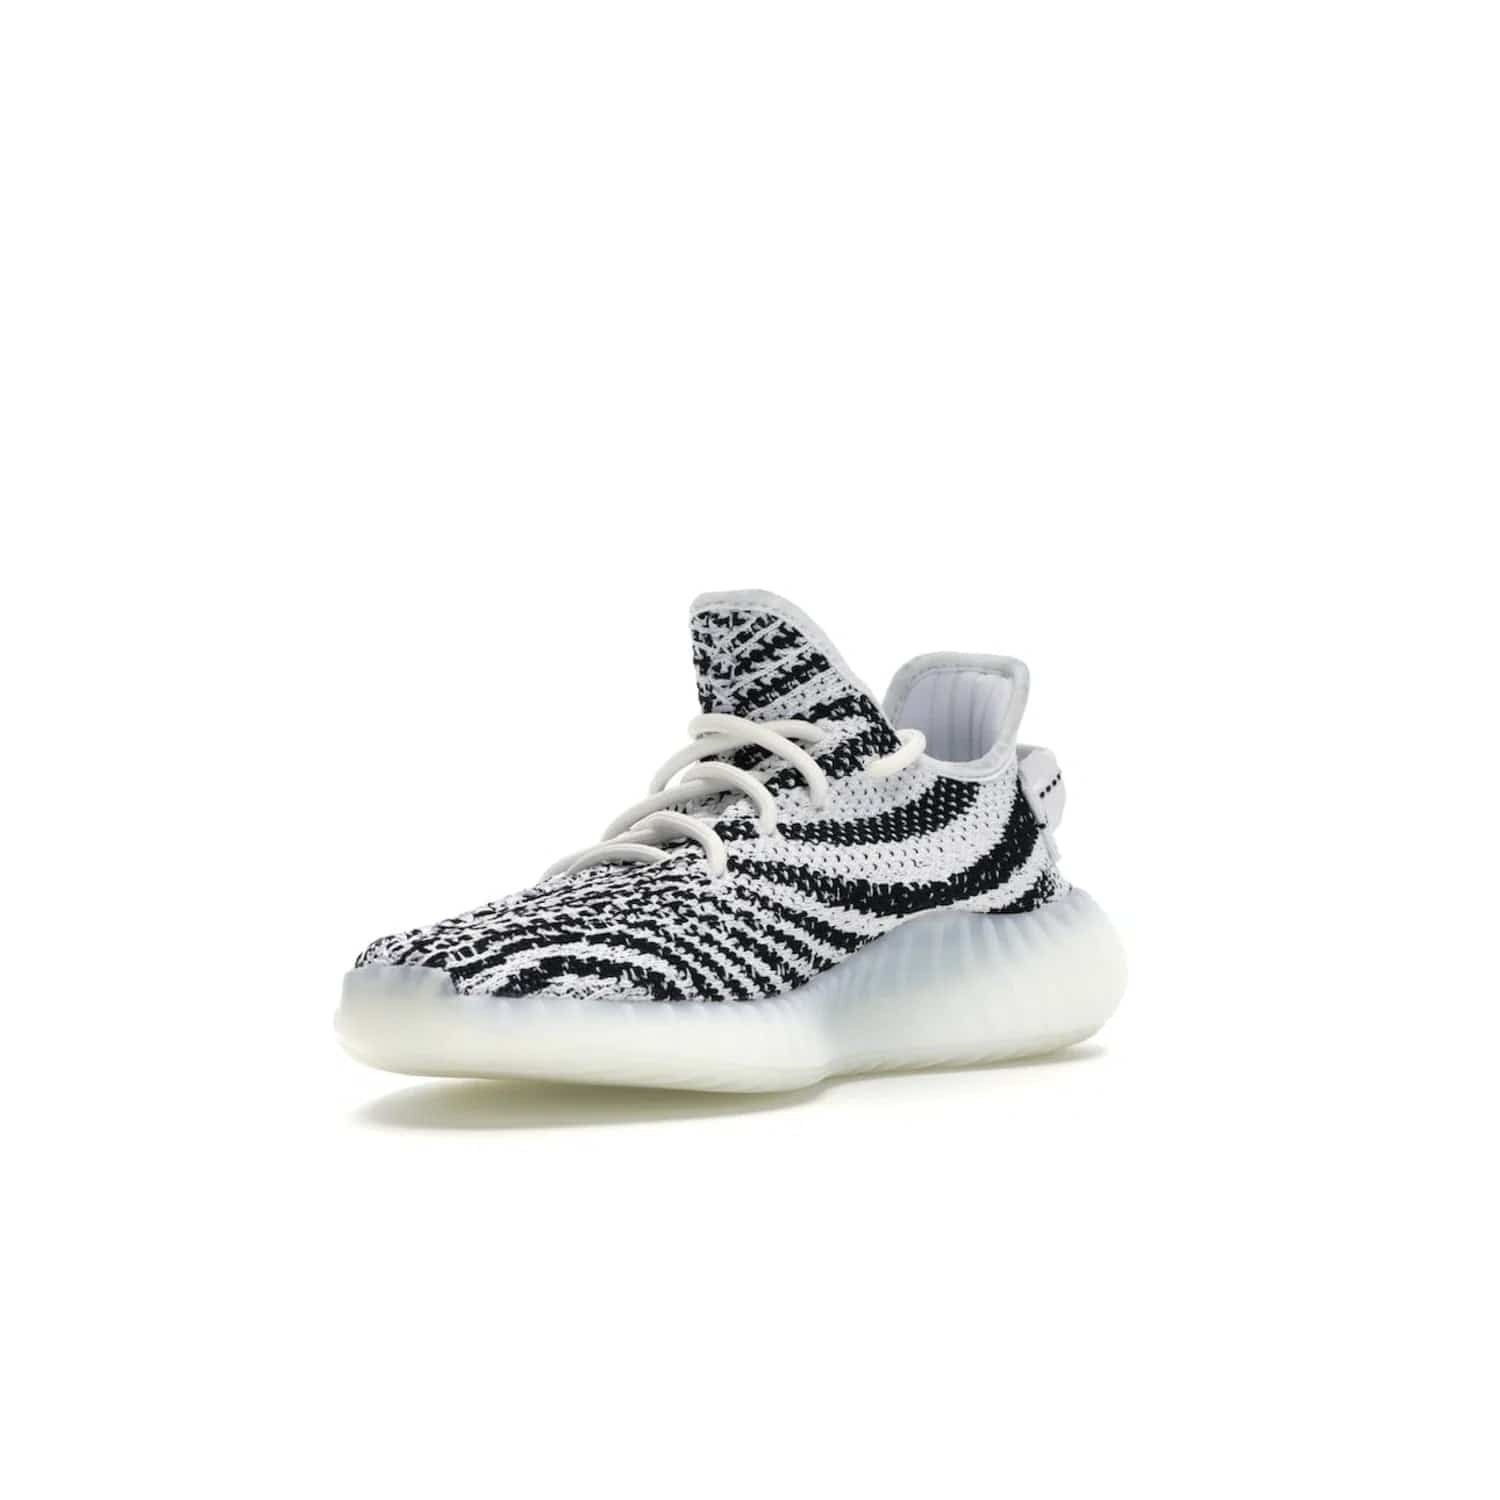 adidas Yeezy Boost 350 V2 Zebra - Image 14 - Only at www.BallersClubKickz.com - #
Score the iconic adidas Yeezy Boost 350 V2 Zebra for a fashionable addition to your street-style. Featuring a Primeknit upper and Boost sole, you'll look great and feel comfortable with every step.